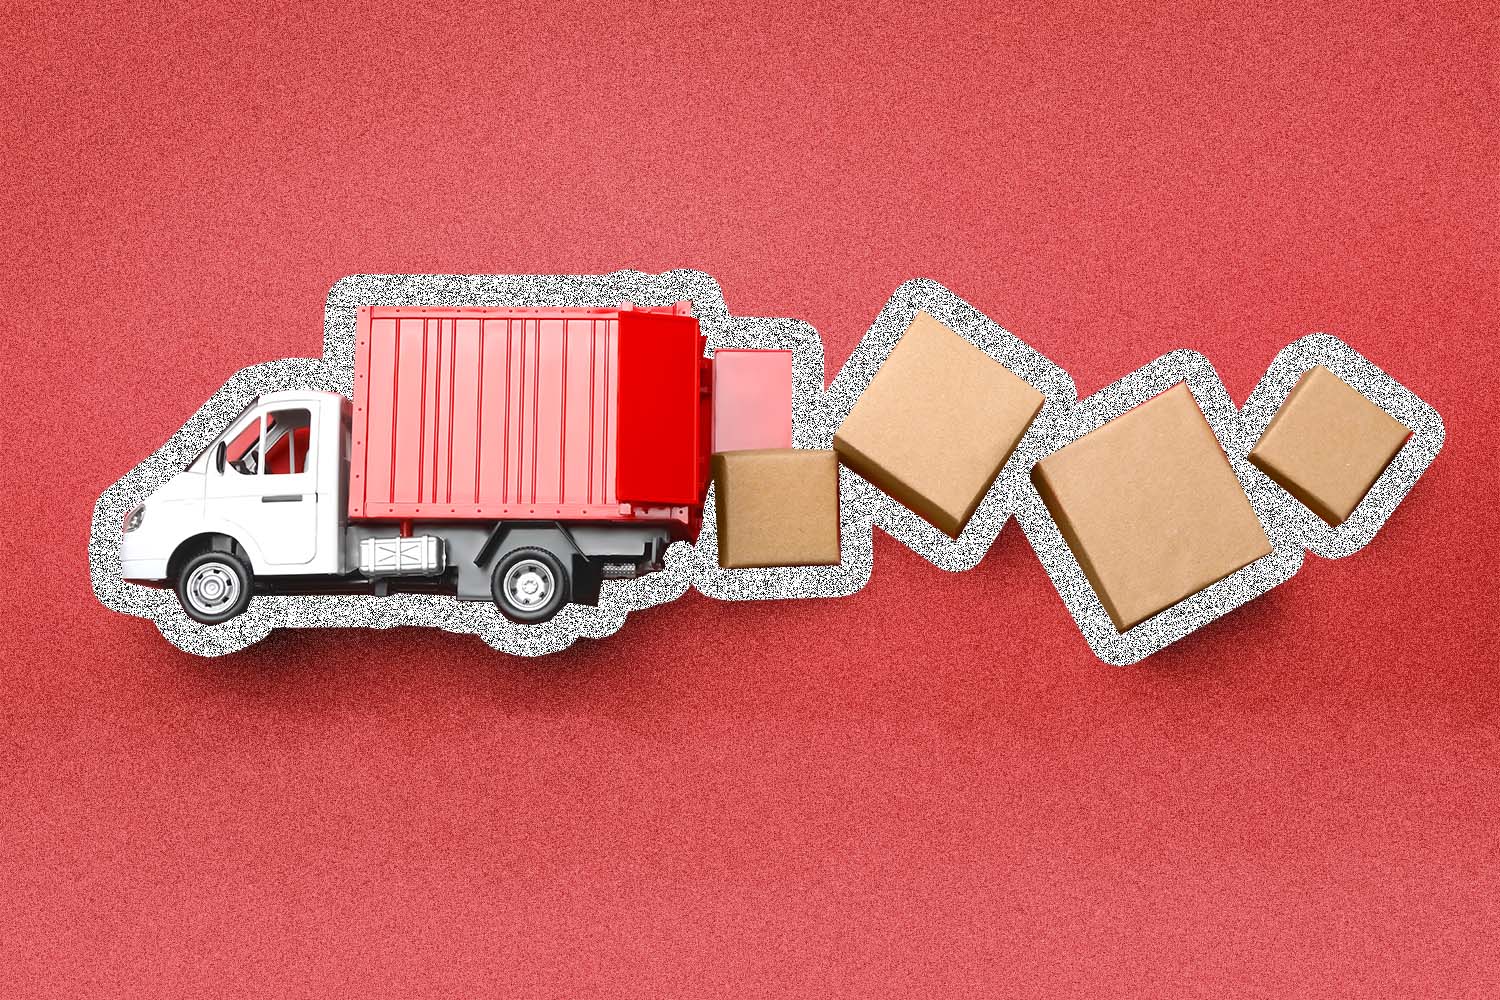 Truck with cardboard boxes falling out